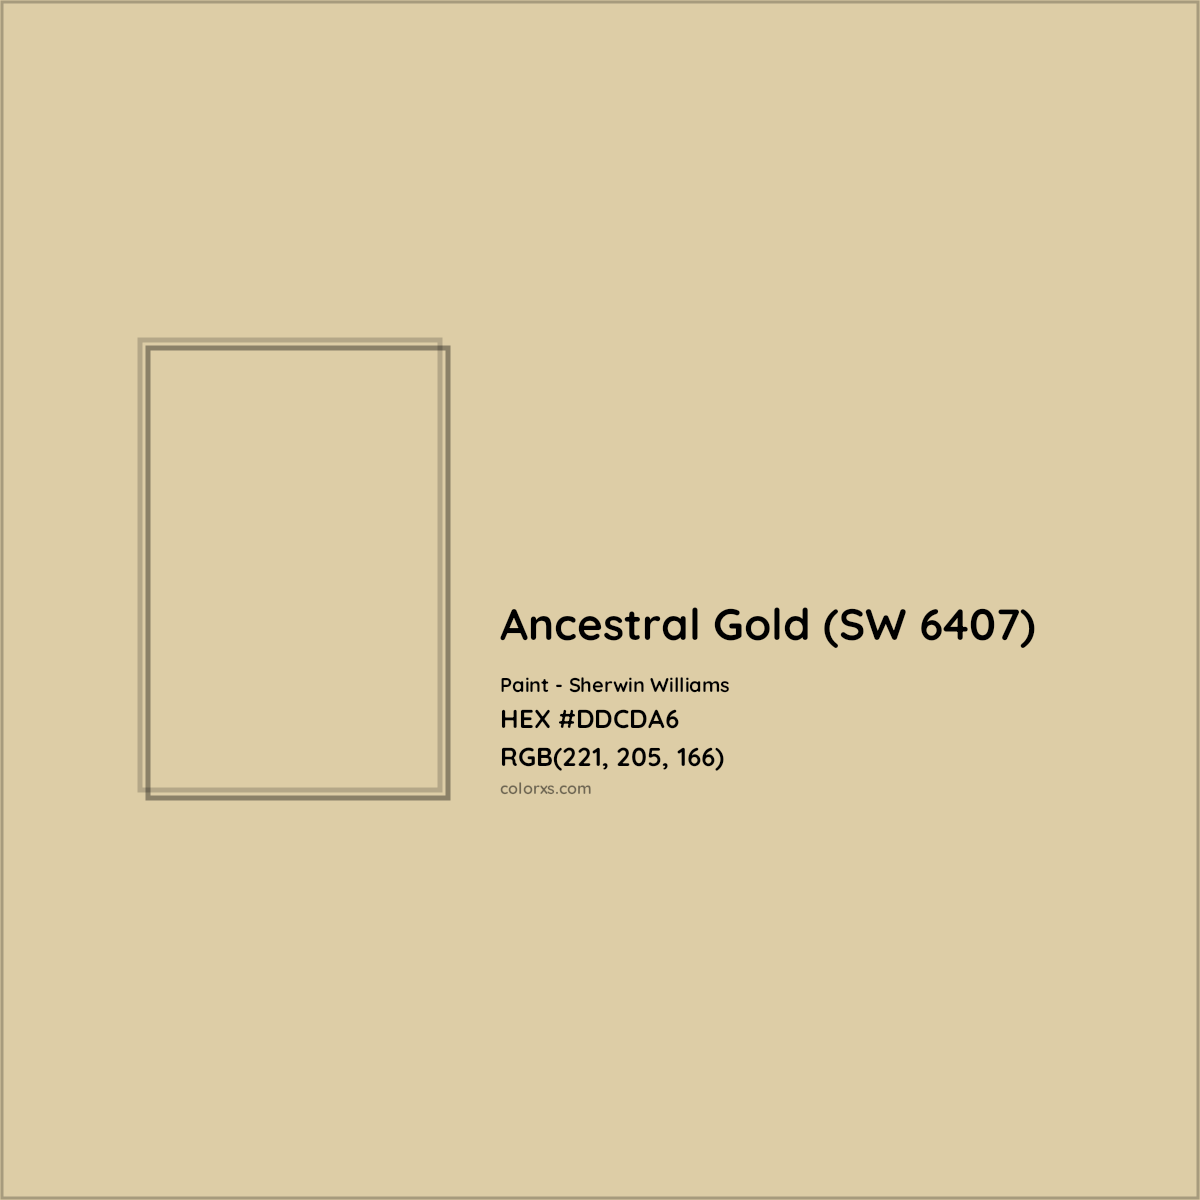 HEX #DDCDA6 Ancestral Gold (SW 6407) Paint Sherwin Williams - Color Code